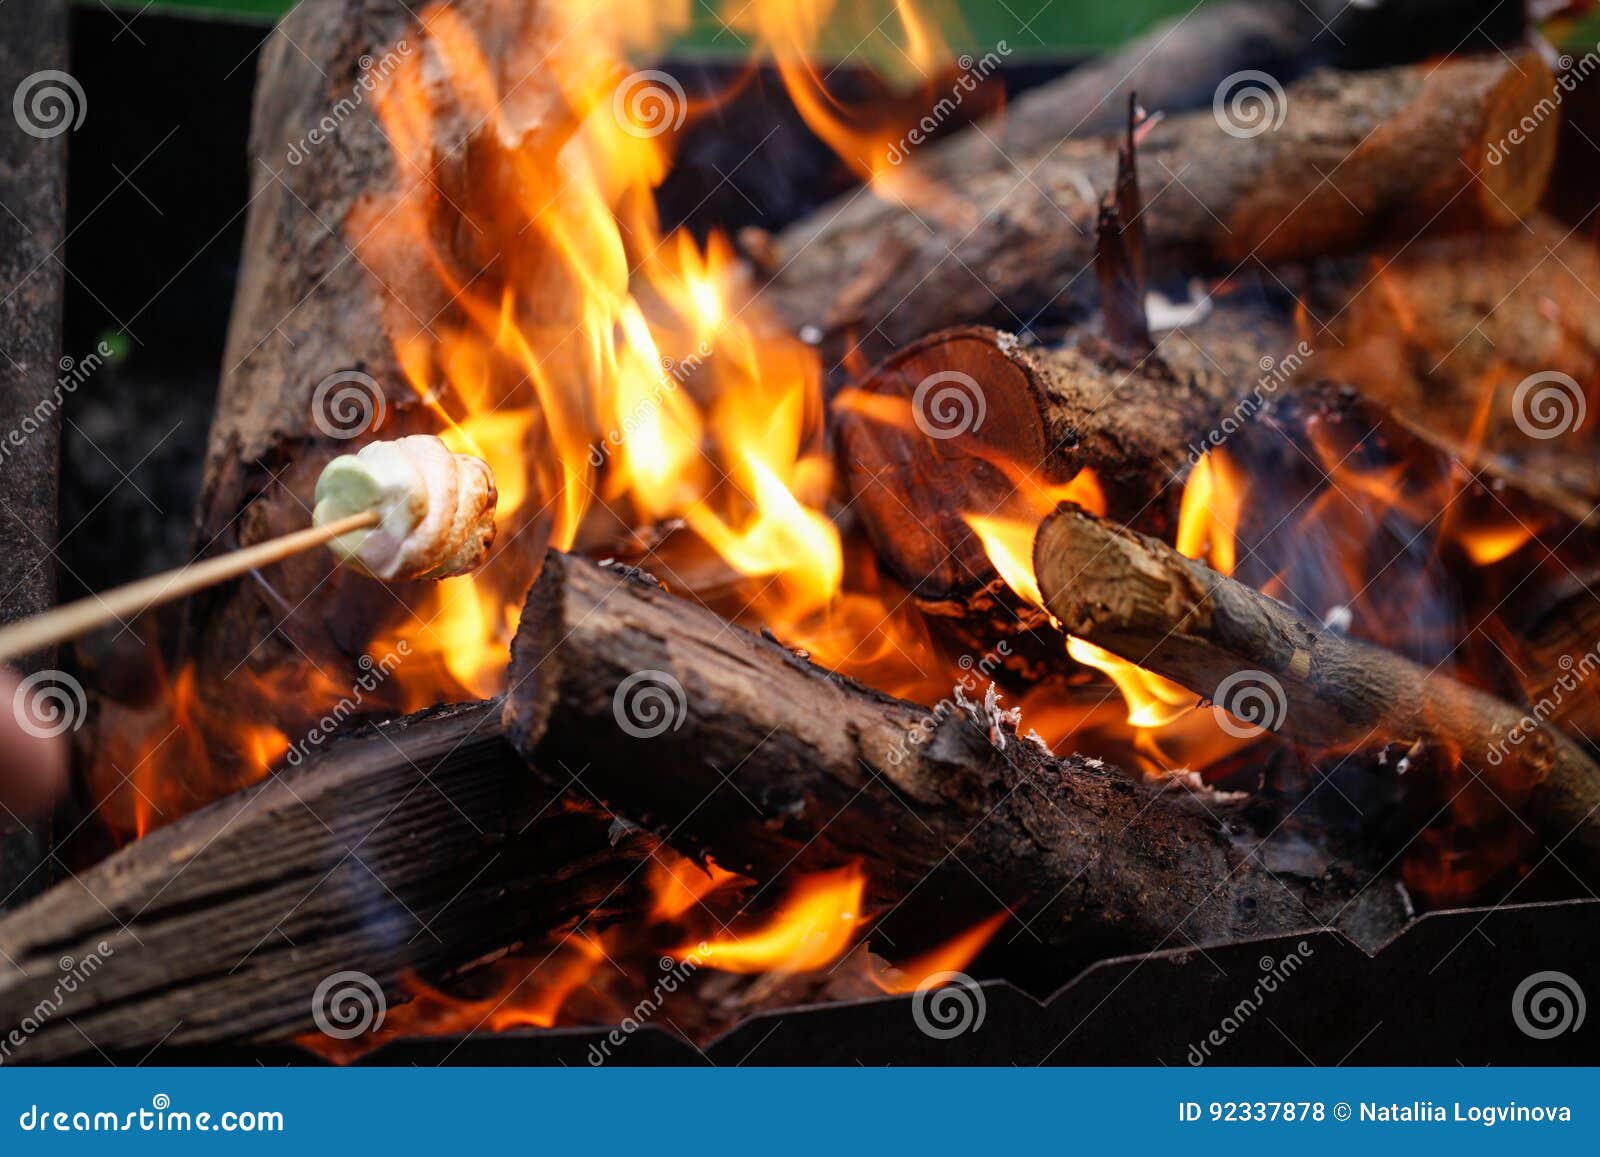 Grilling Marshmallows on Fire Stock Photo - Image of candy, grilling ...